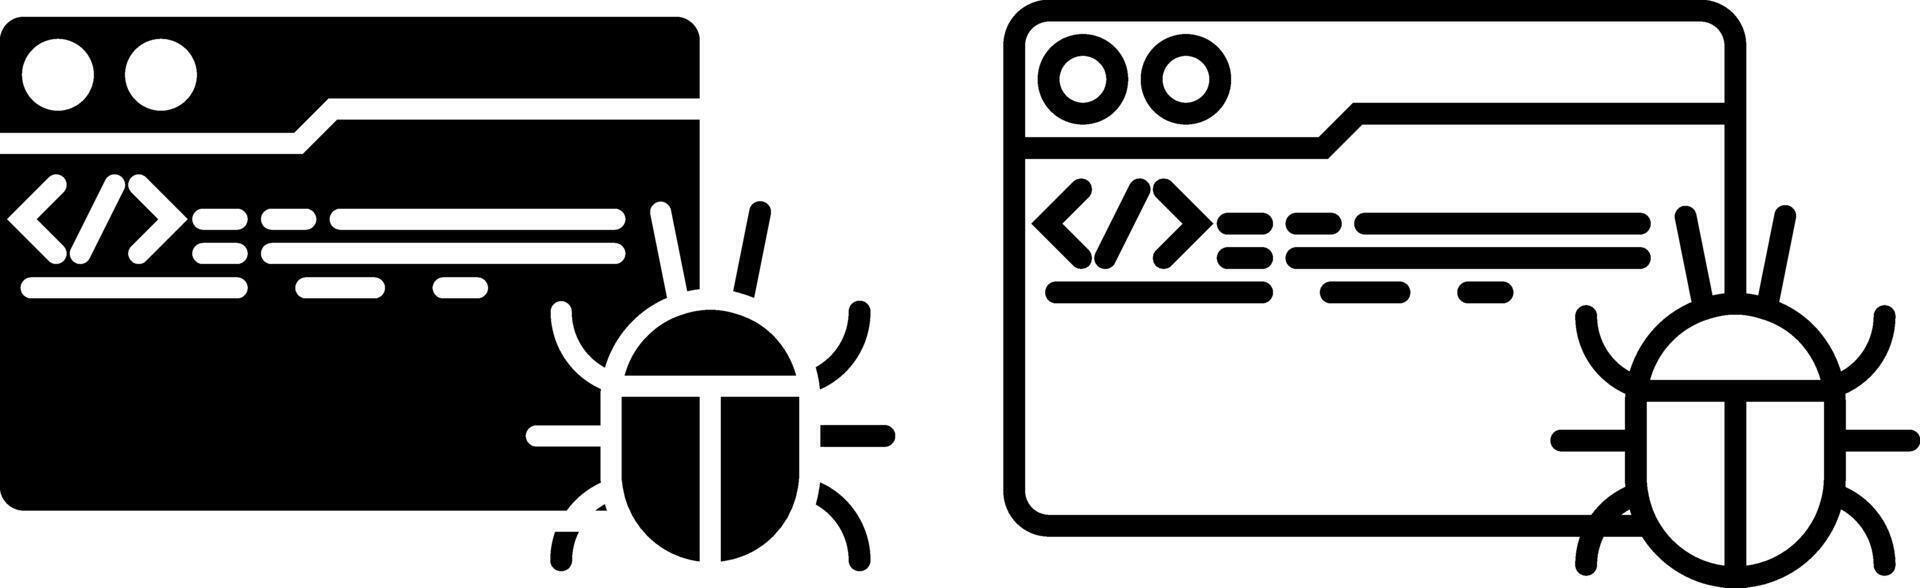 program bug icon, sign, or symbol in glyph and line style isolated on transparent background. Vector illustration